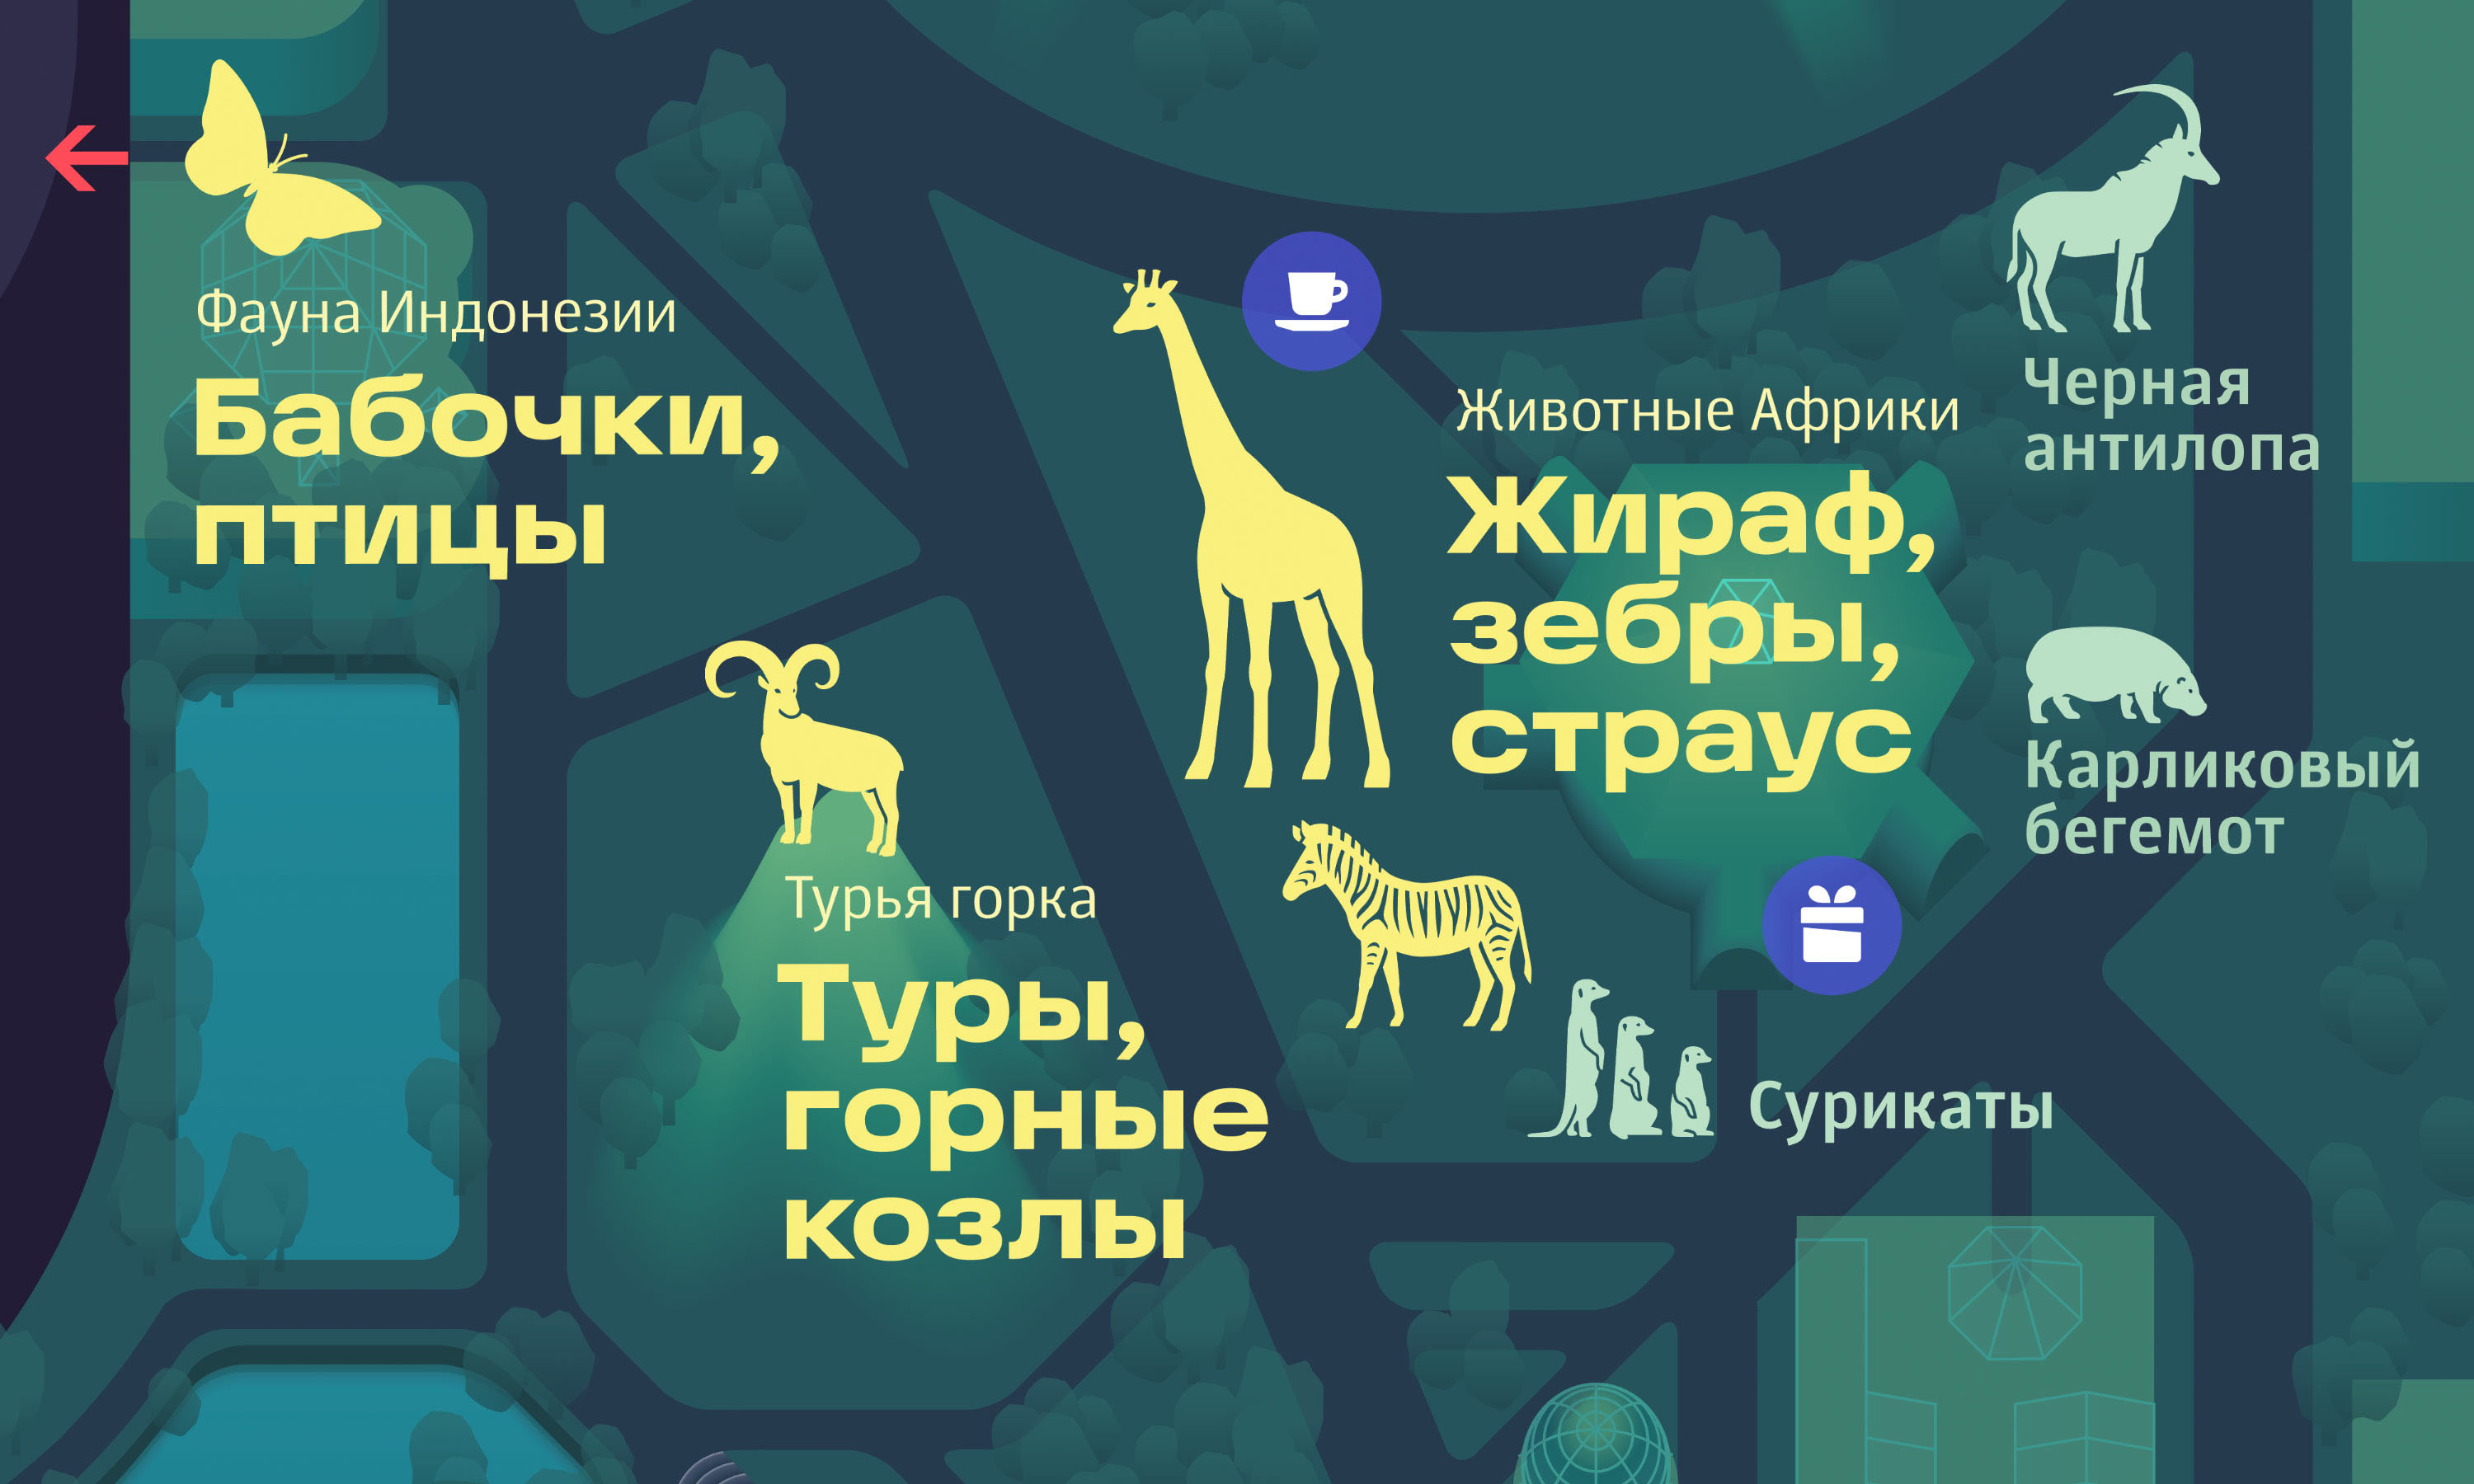 moscow zoo navigation map details 04